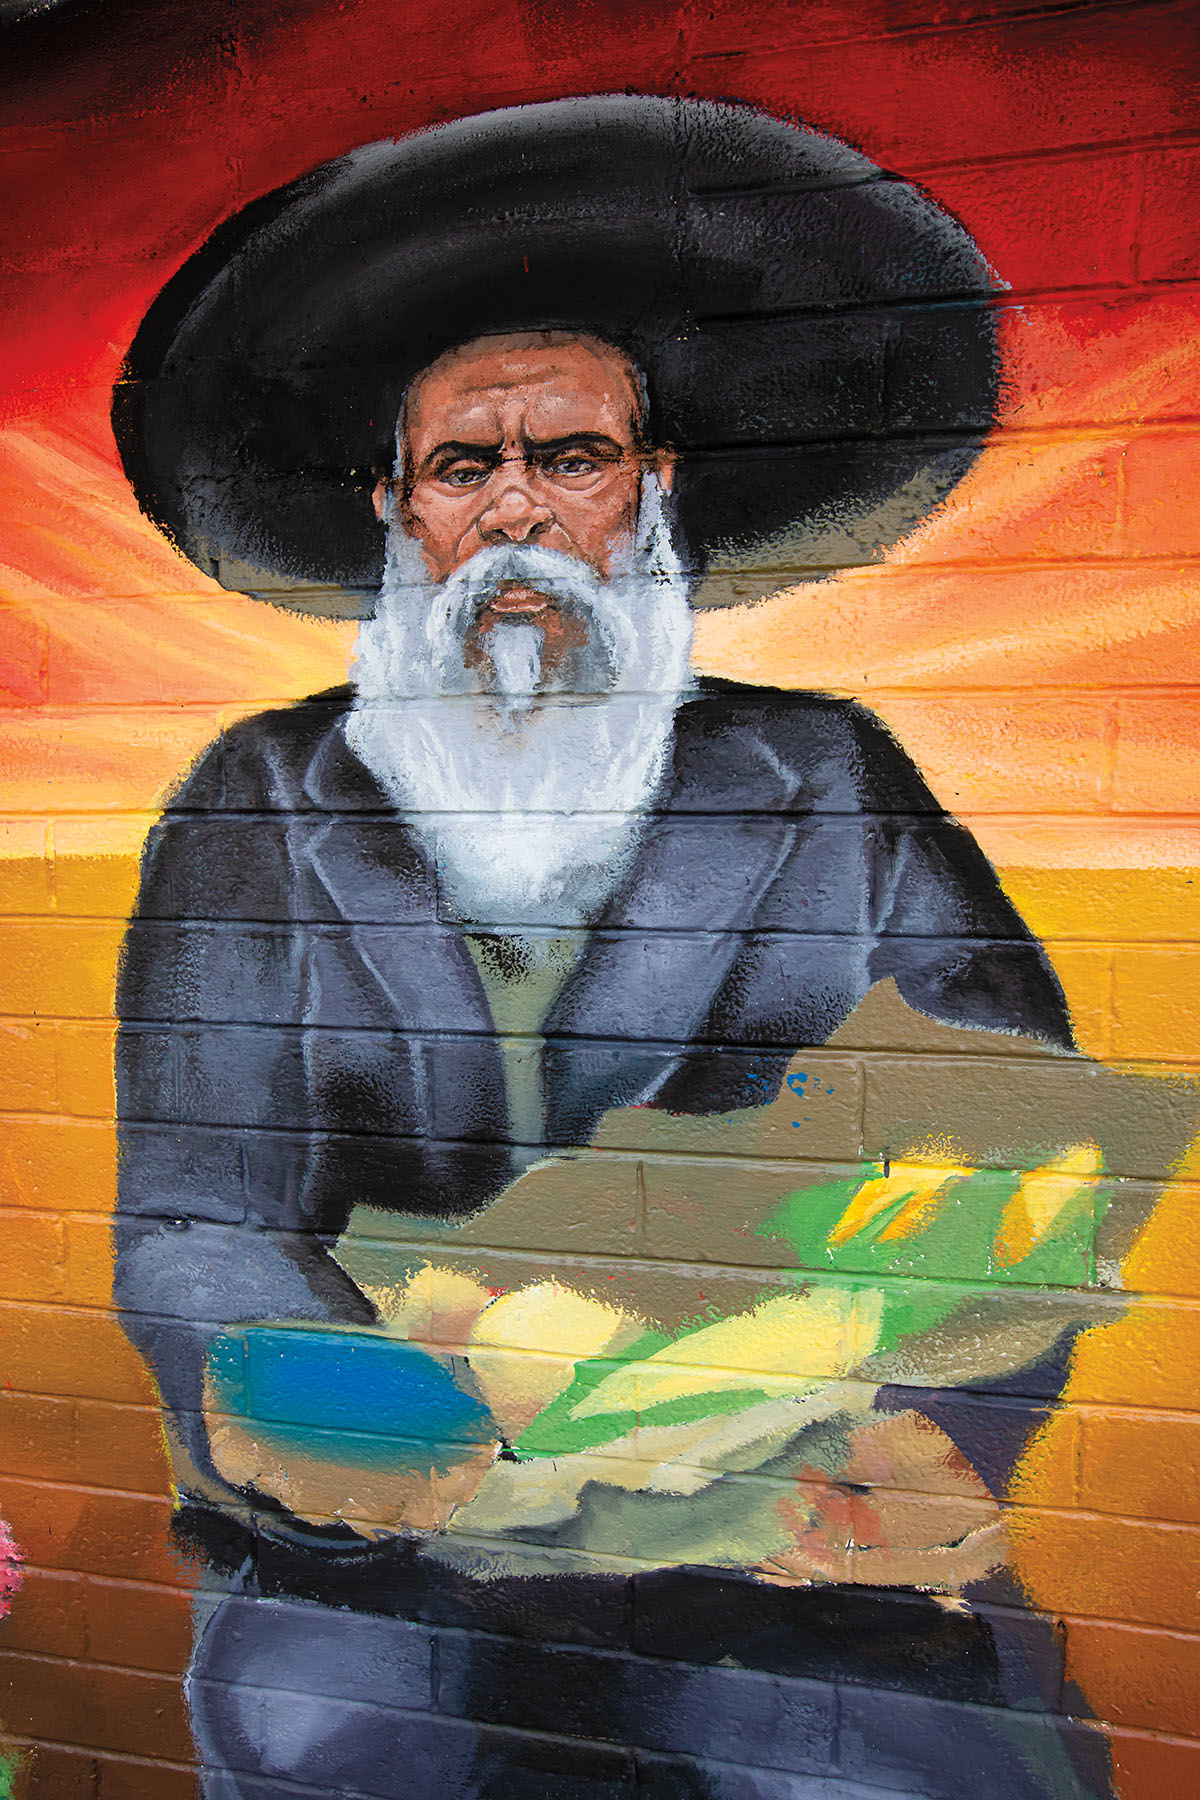 A mural of Don Pedro Jaramillo holding a vegetables